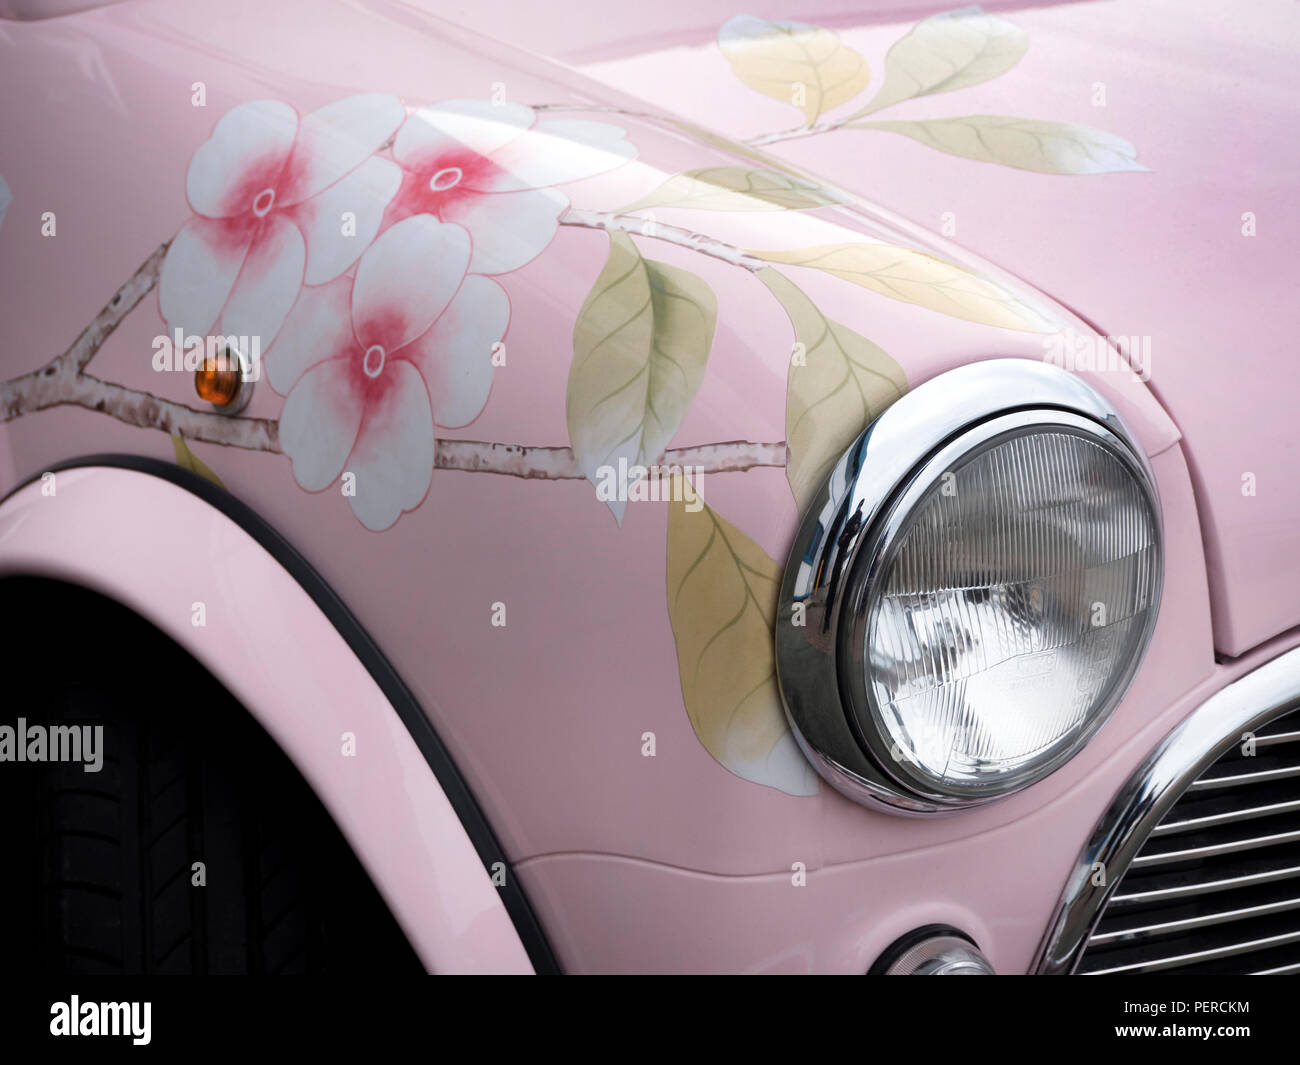 2000 Rover Mini flower painted. Stock Photo